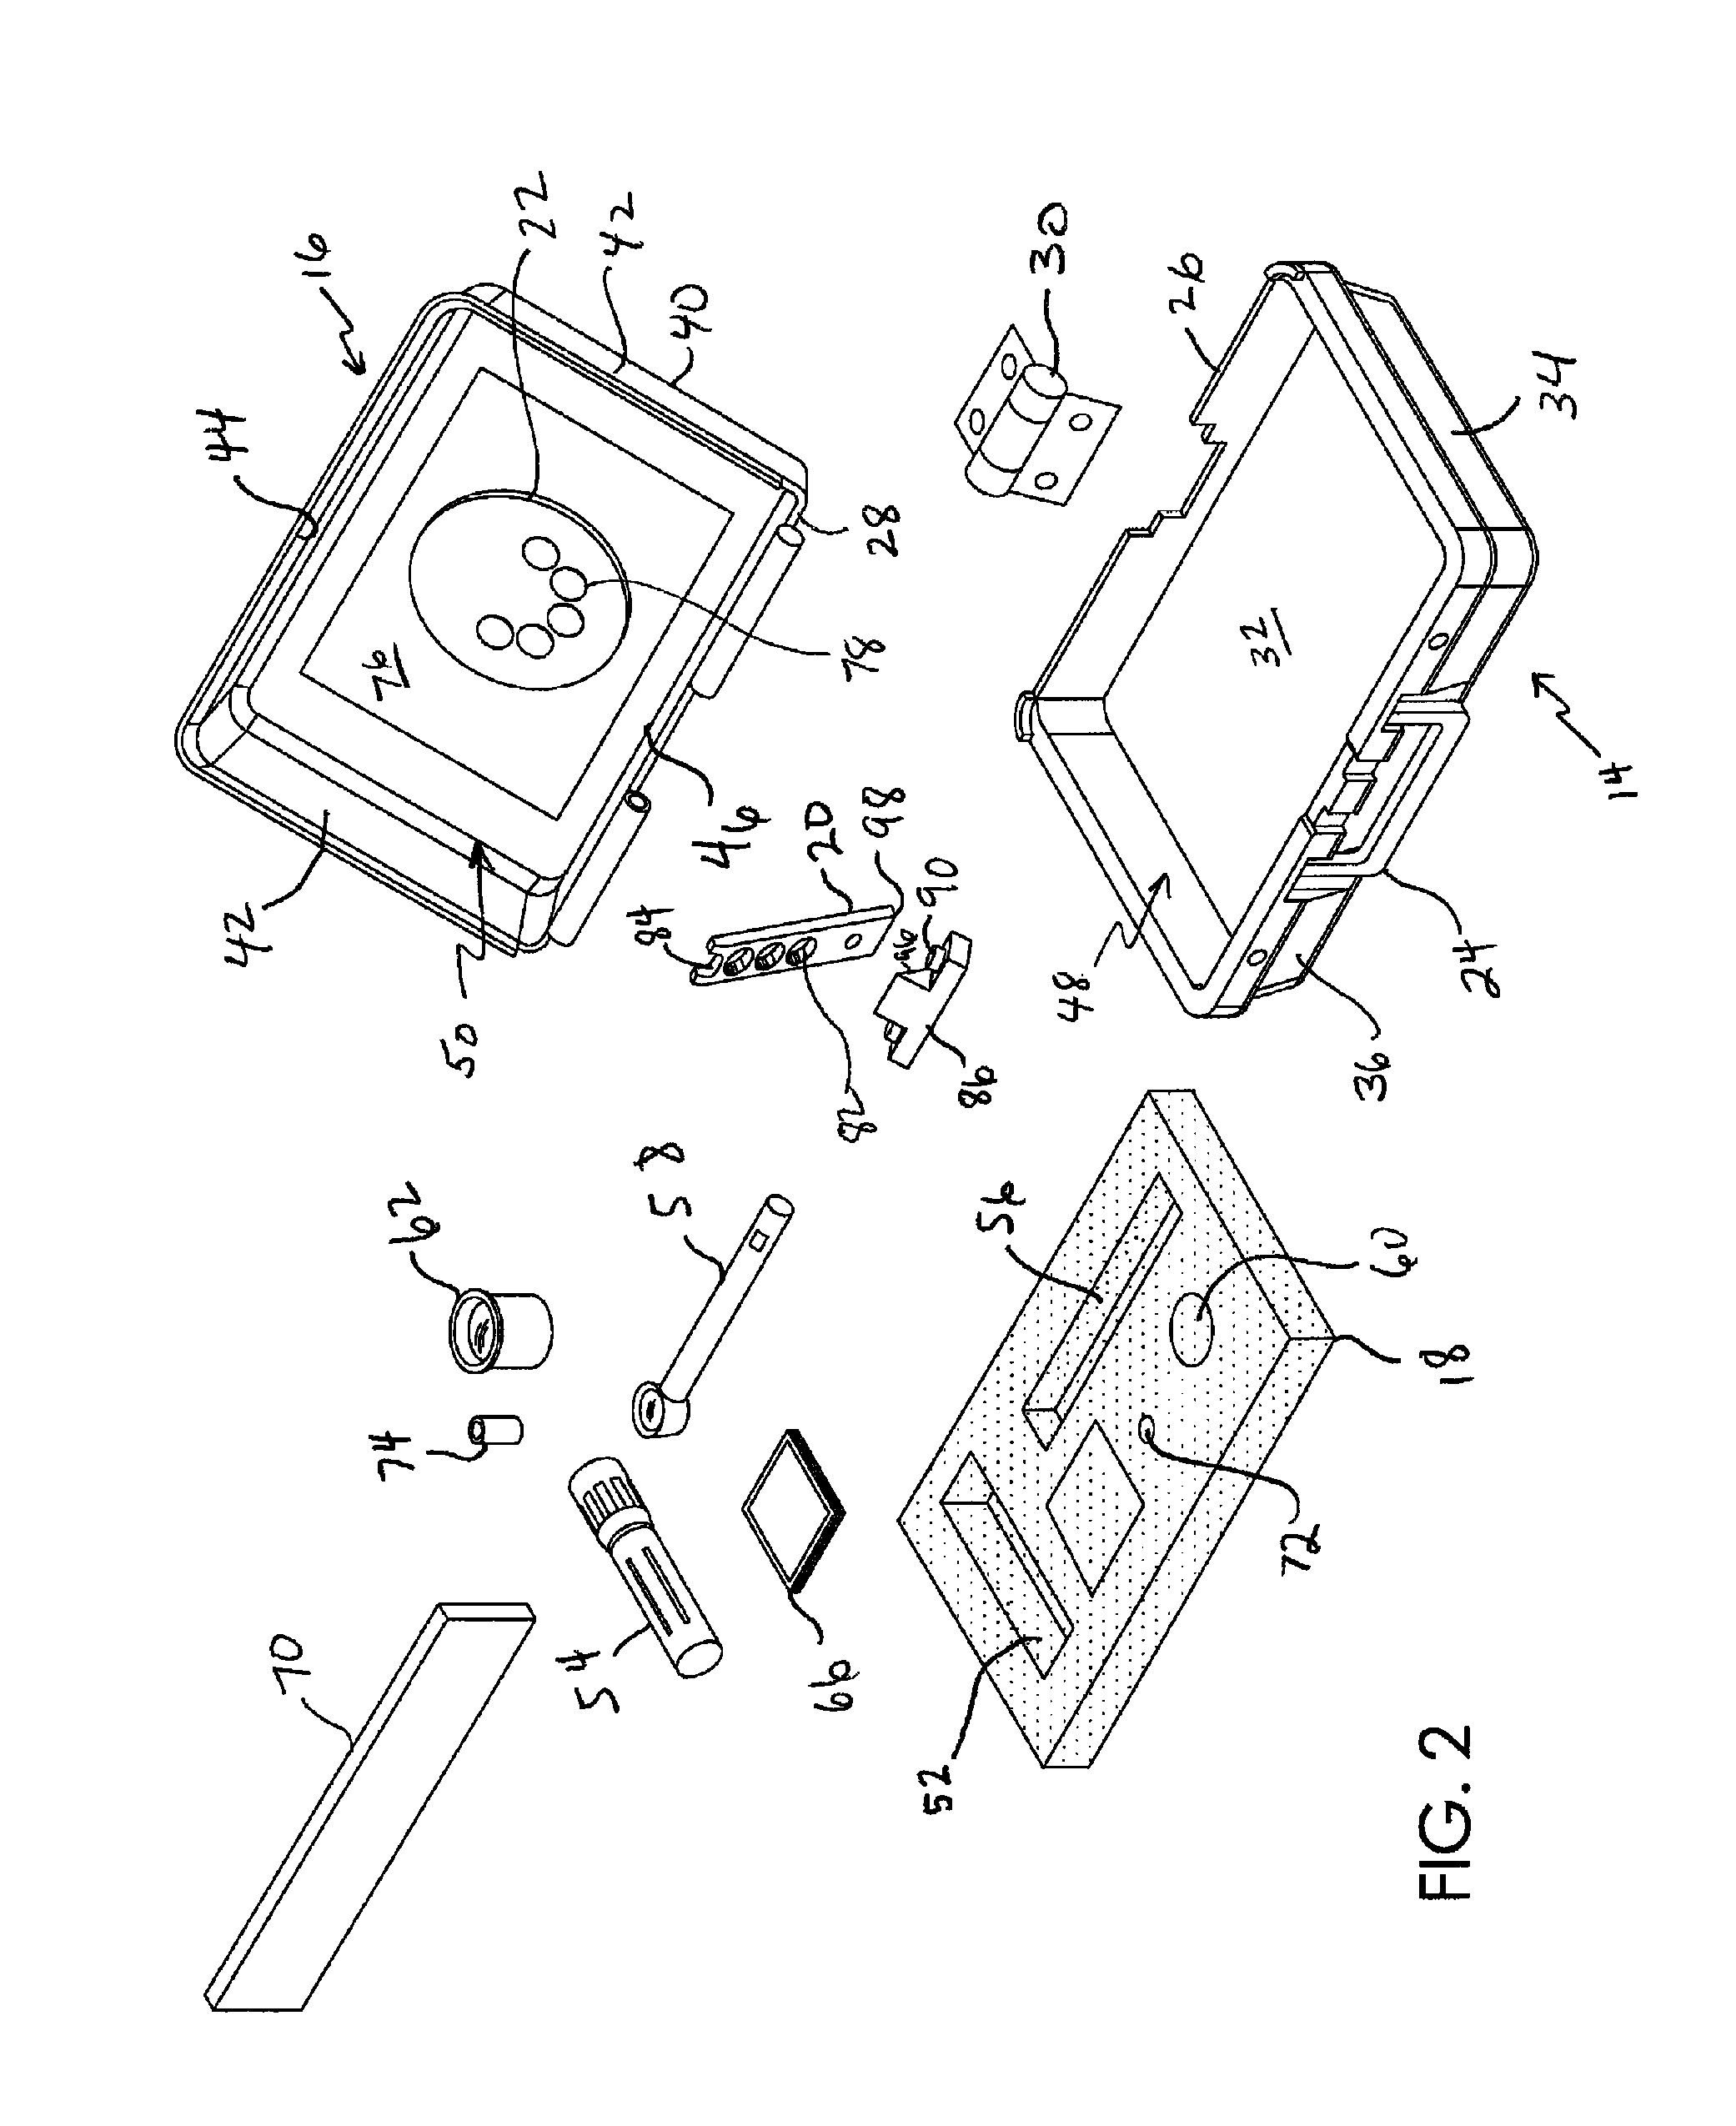 Endoscope testing device and method of using same